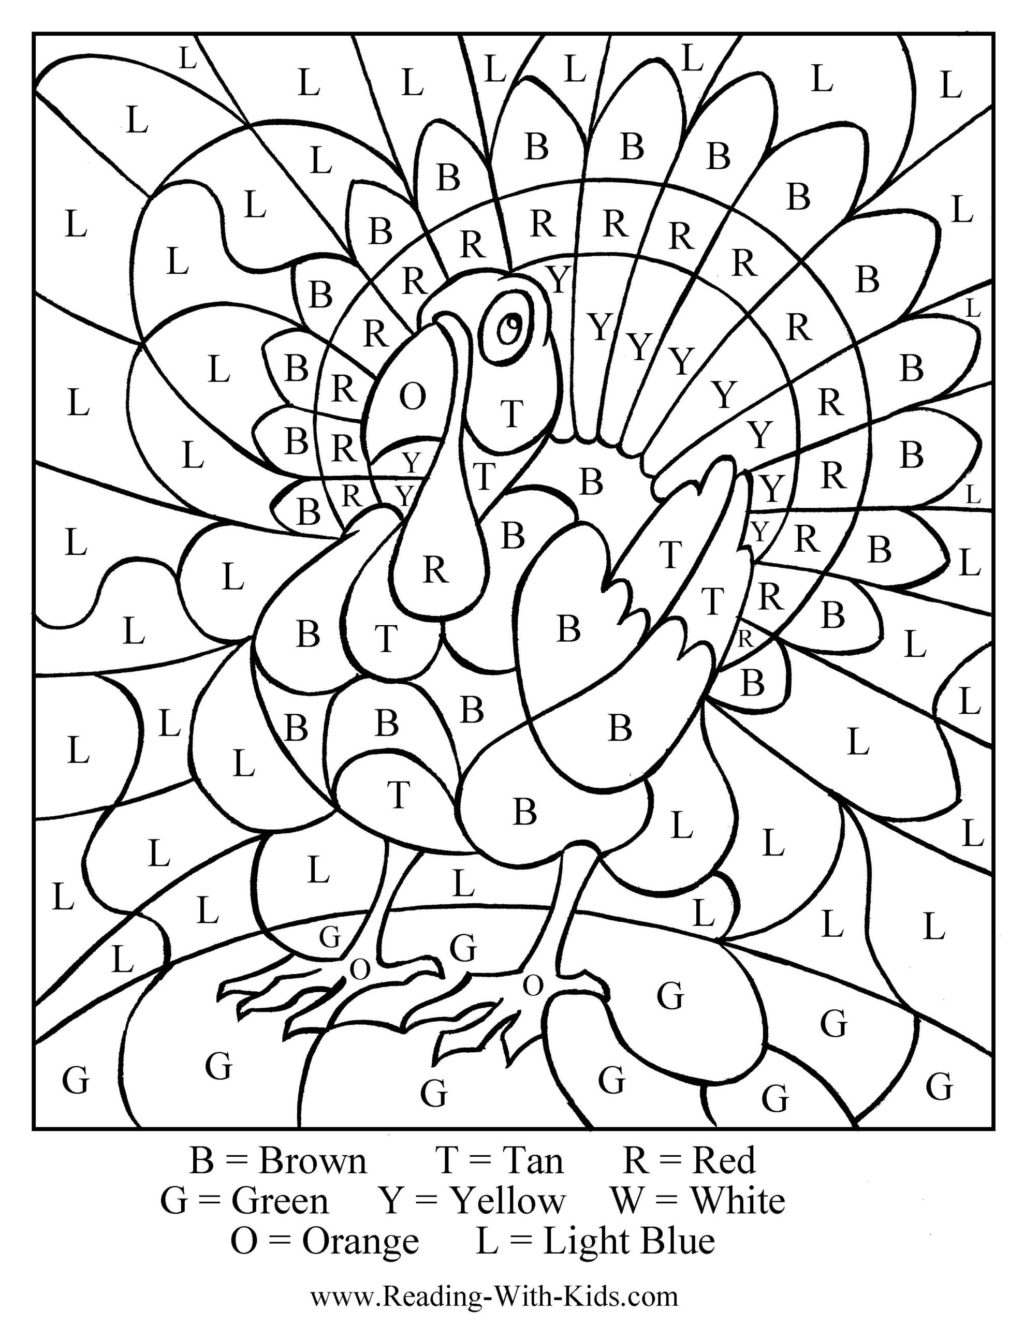 Worksheet ~ Colorletter Great Idea For Thanksgiving